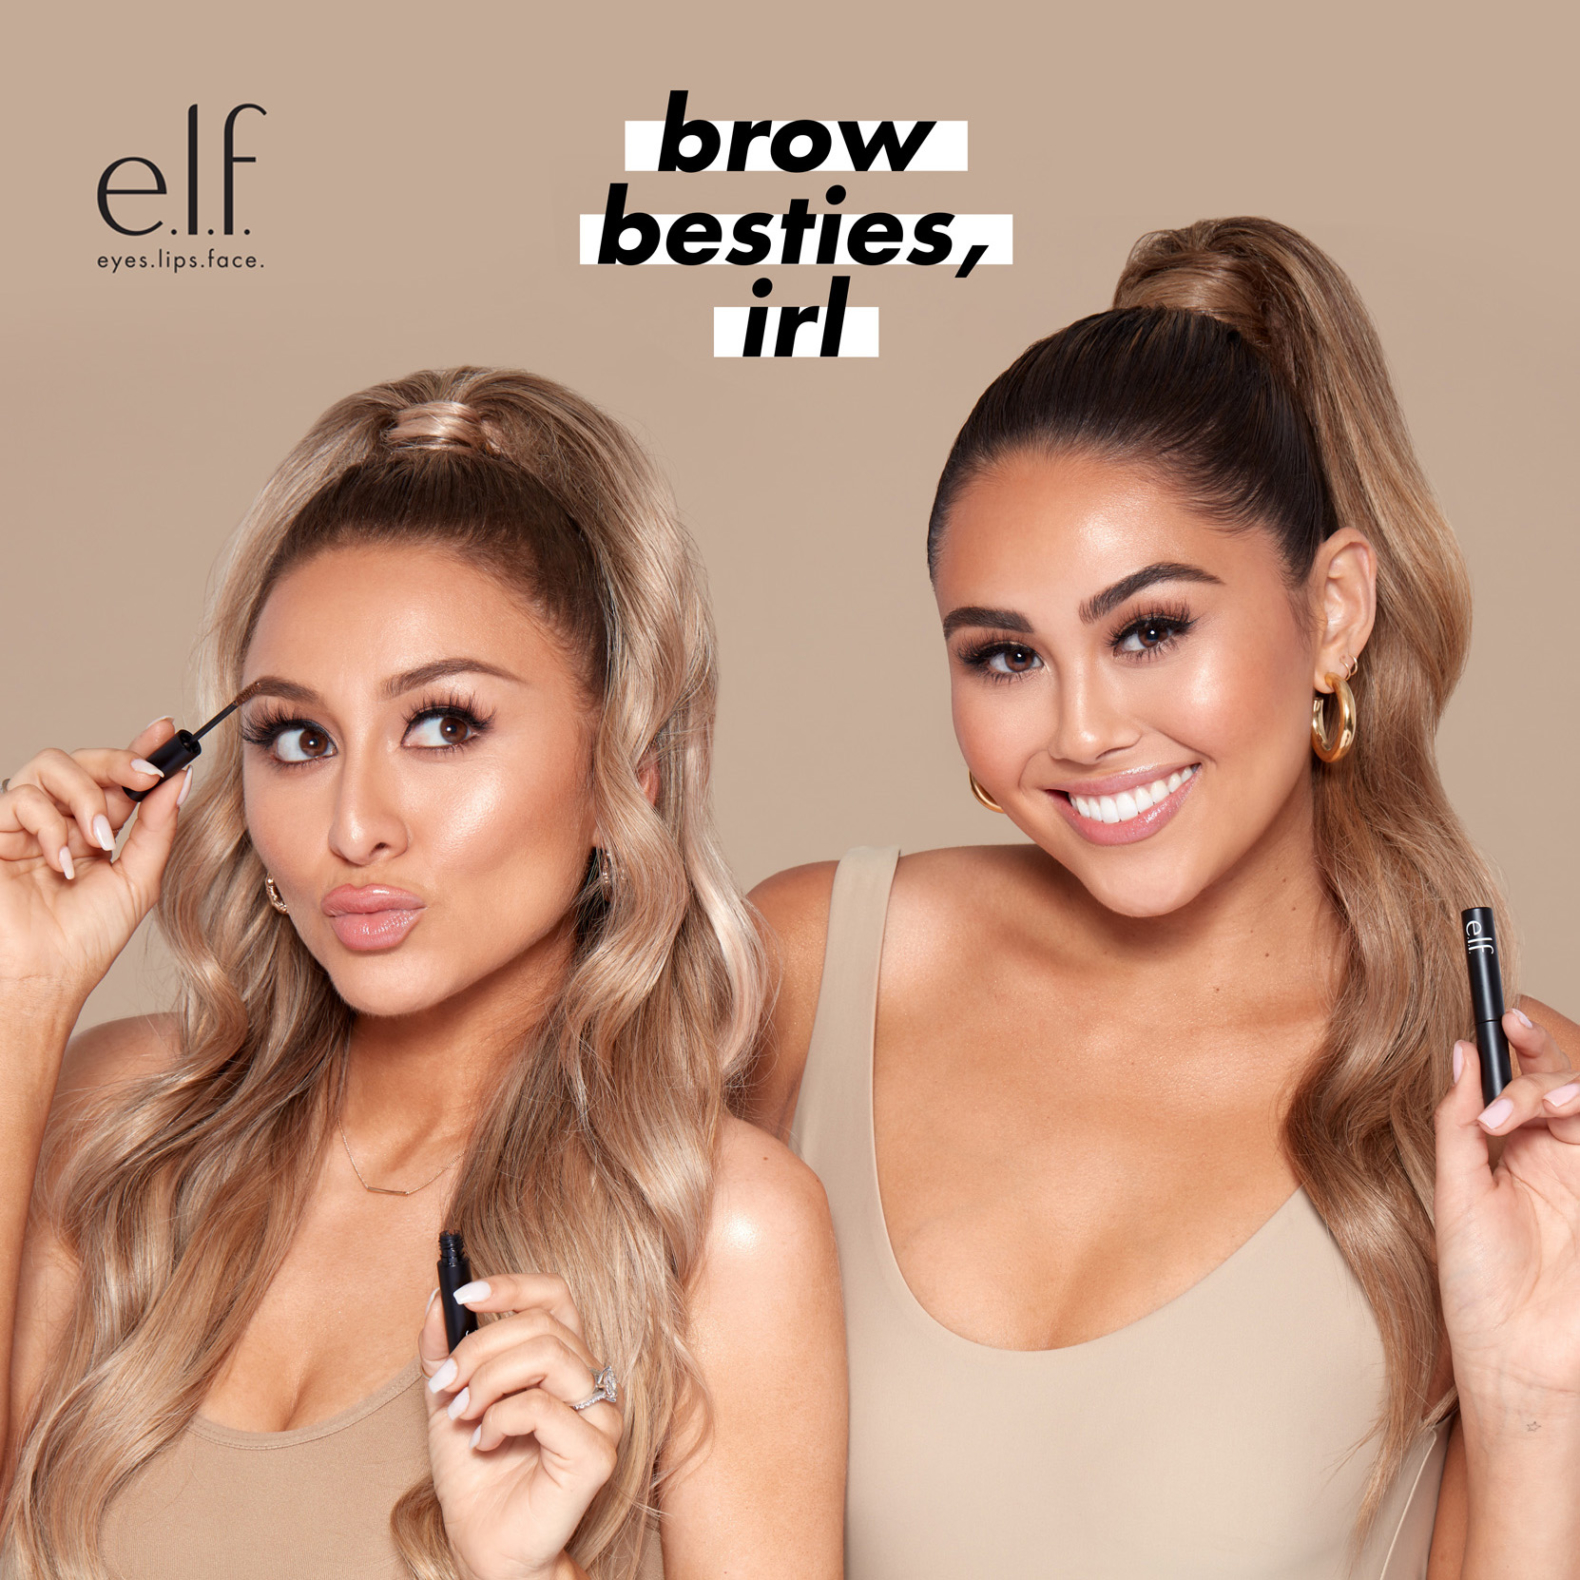 Two smiling people wearing makeup with long ponytails and matching tan tank tops holding eyebrow makeup products from e.l.f. The e.l.f. logo appears in the left corner and the words "brow besties, irl" are in the center on a white background.